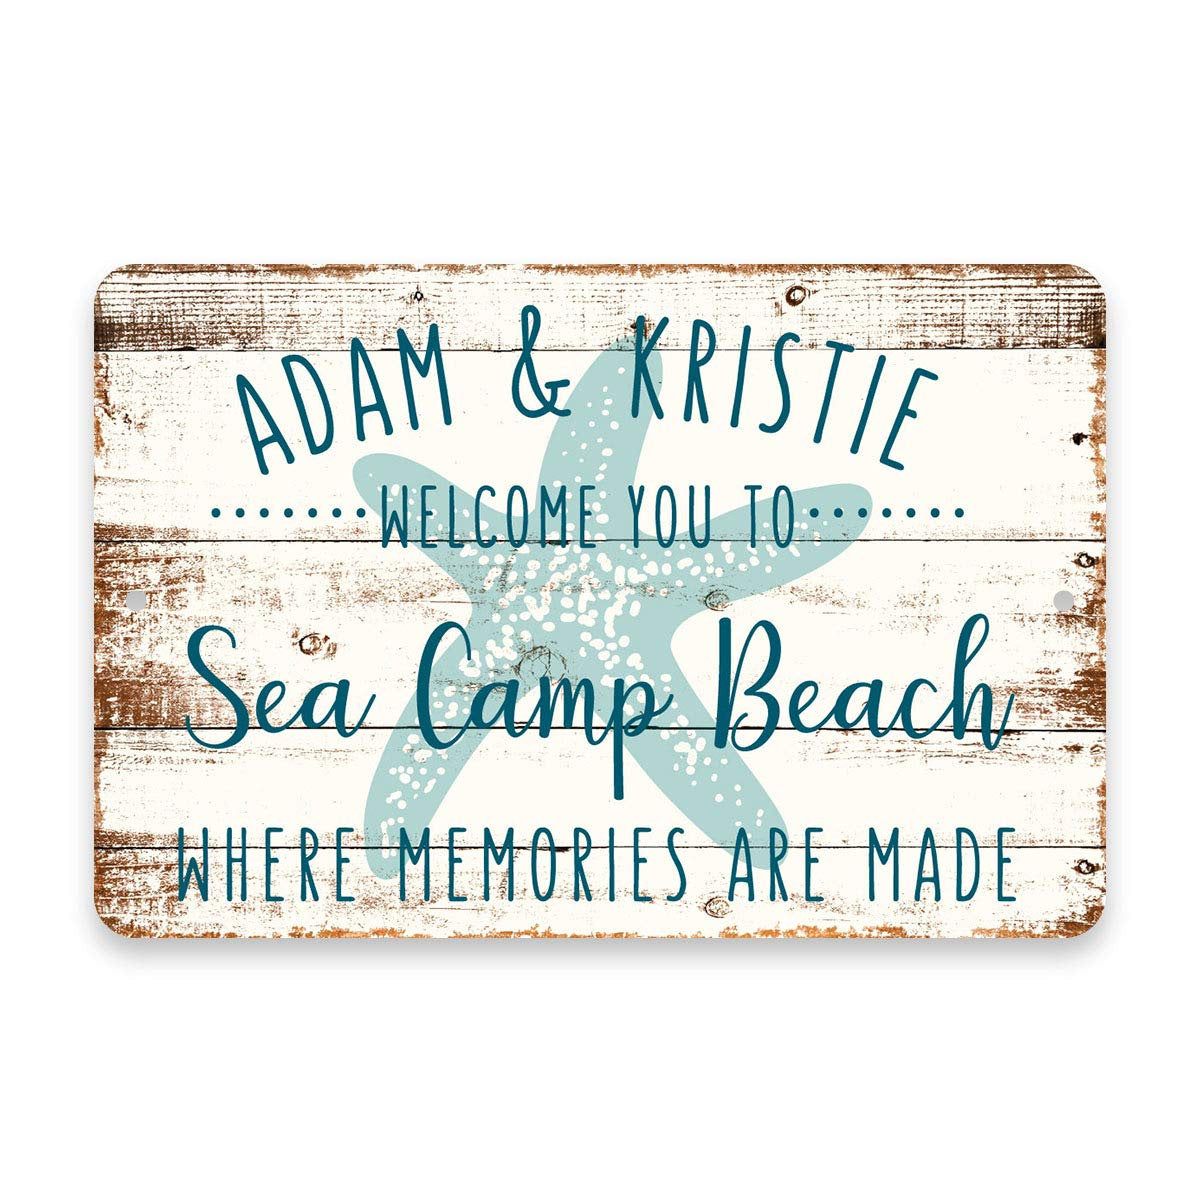 Personalized Welcome to Sea Camp Beach Where Memories are Made Sign - 8 X 12 Metal Sign with Wood Look